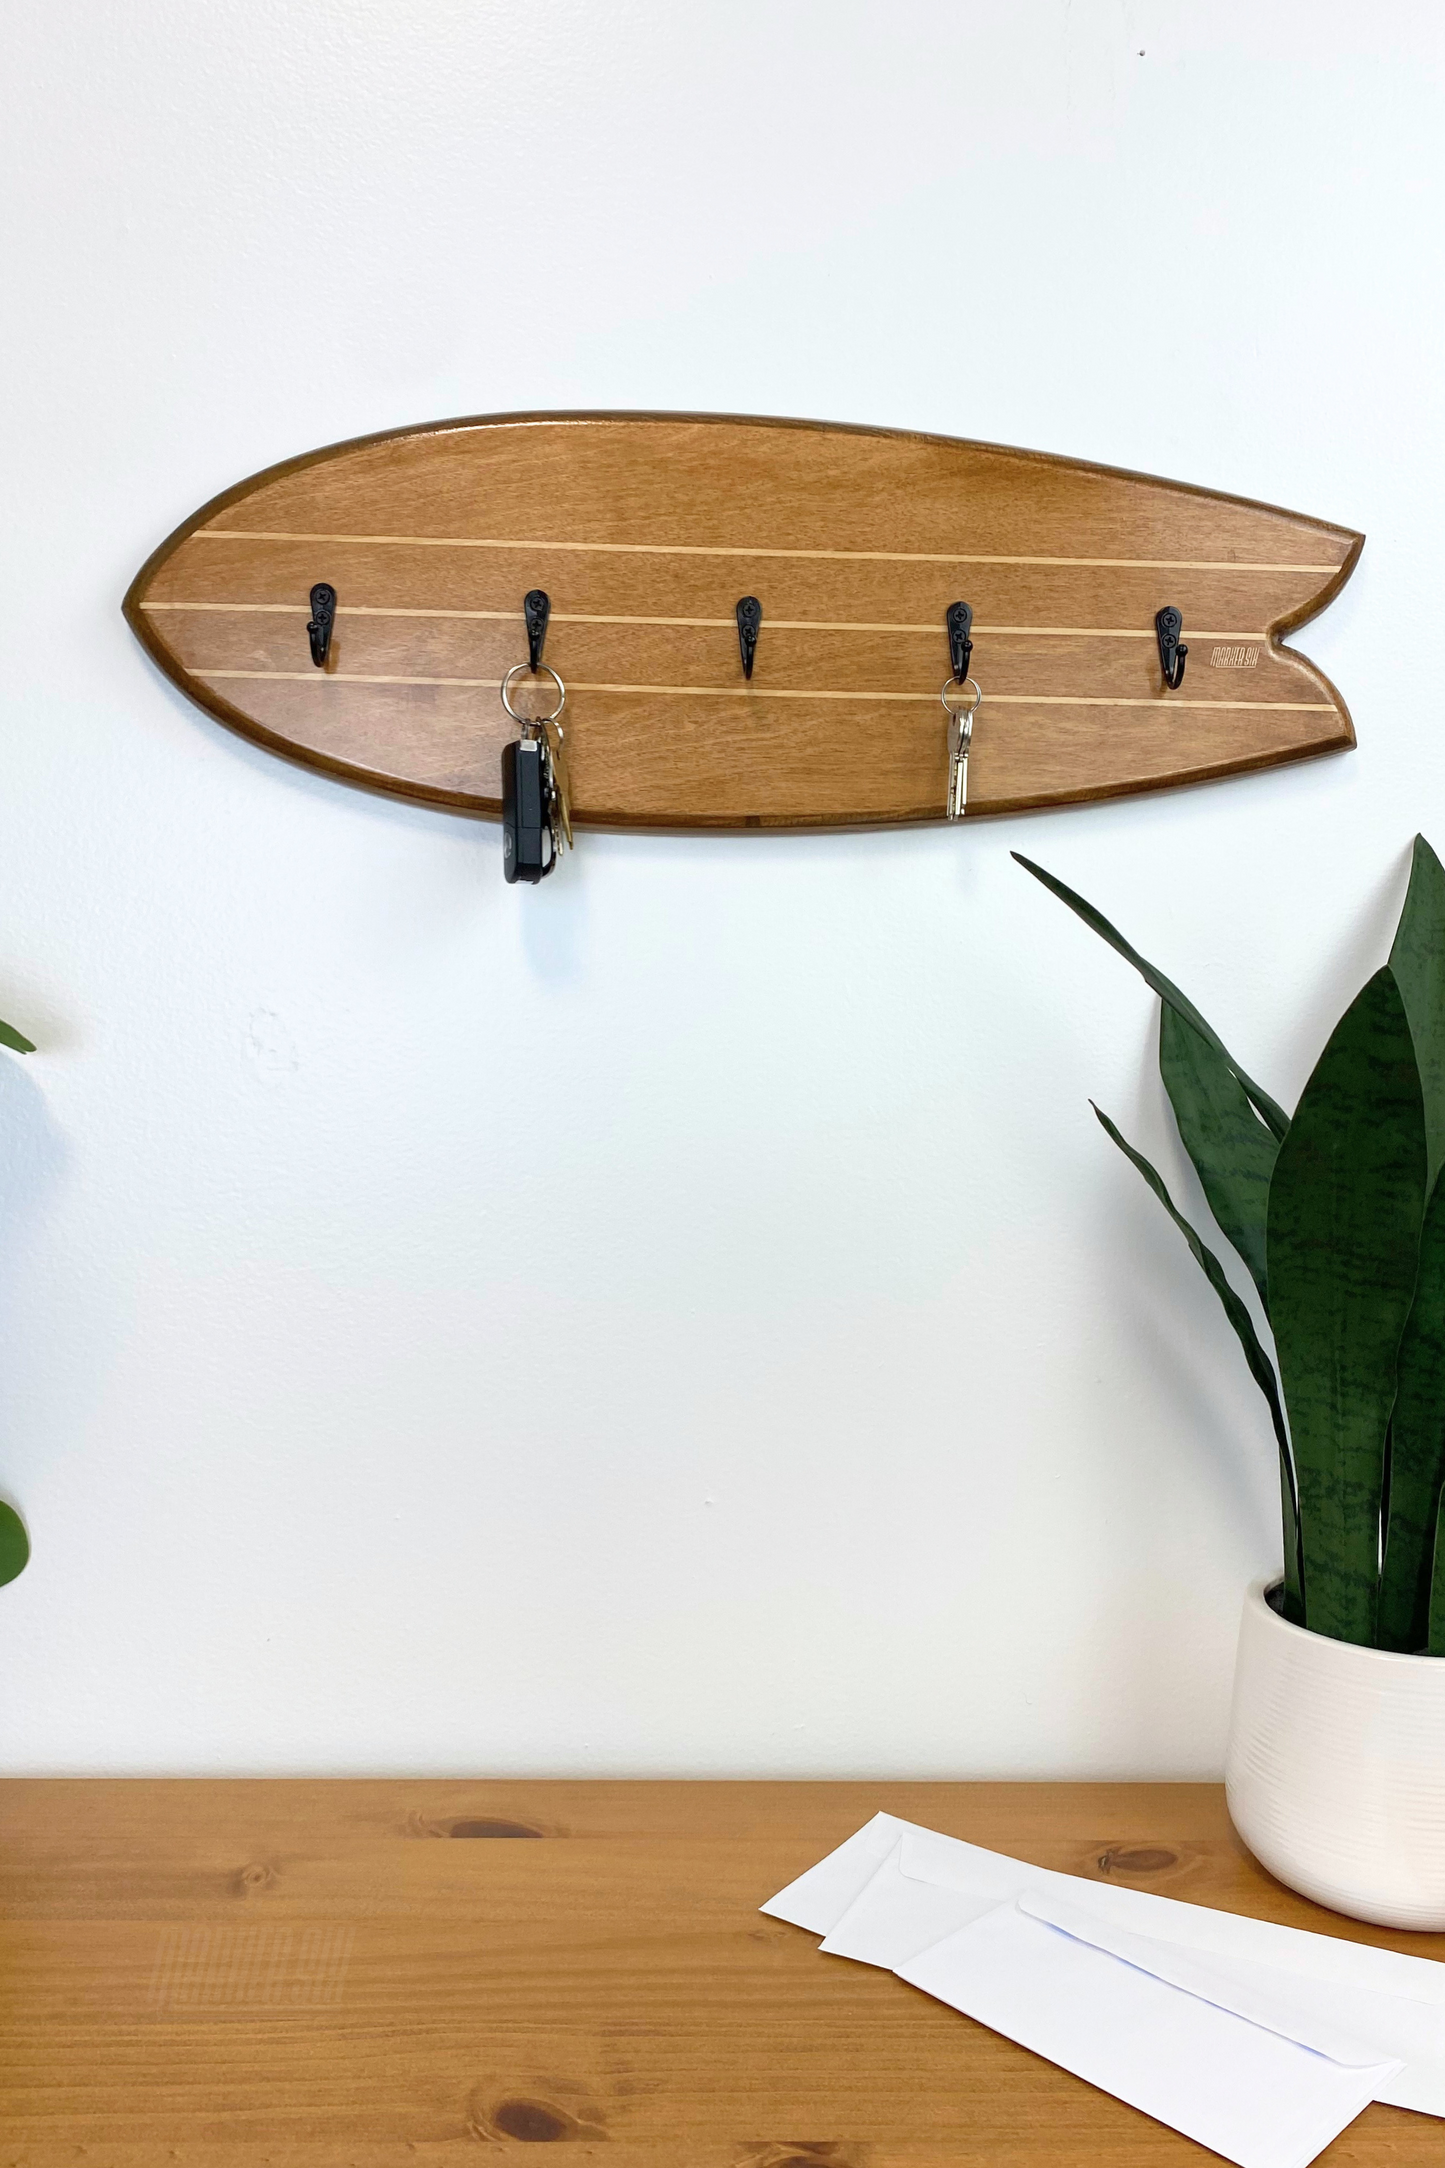 Stained Fish Surfboard Key Holder